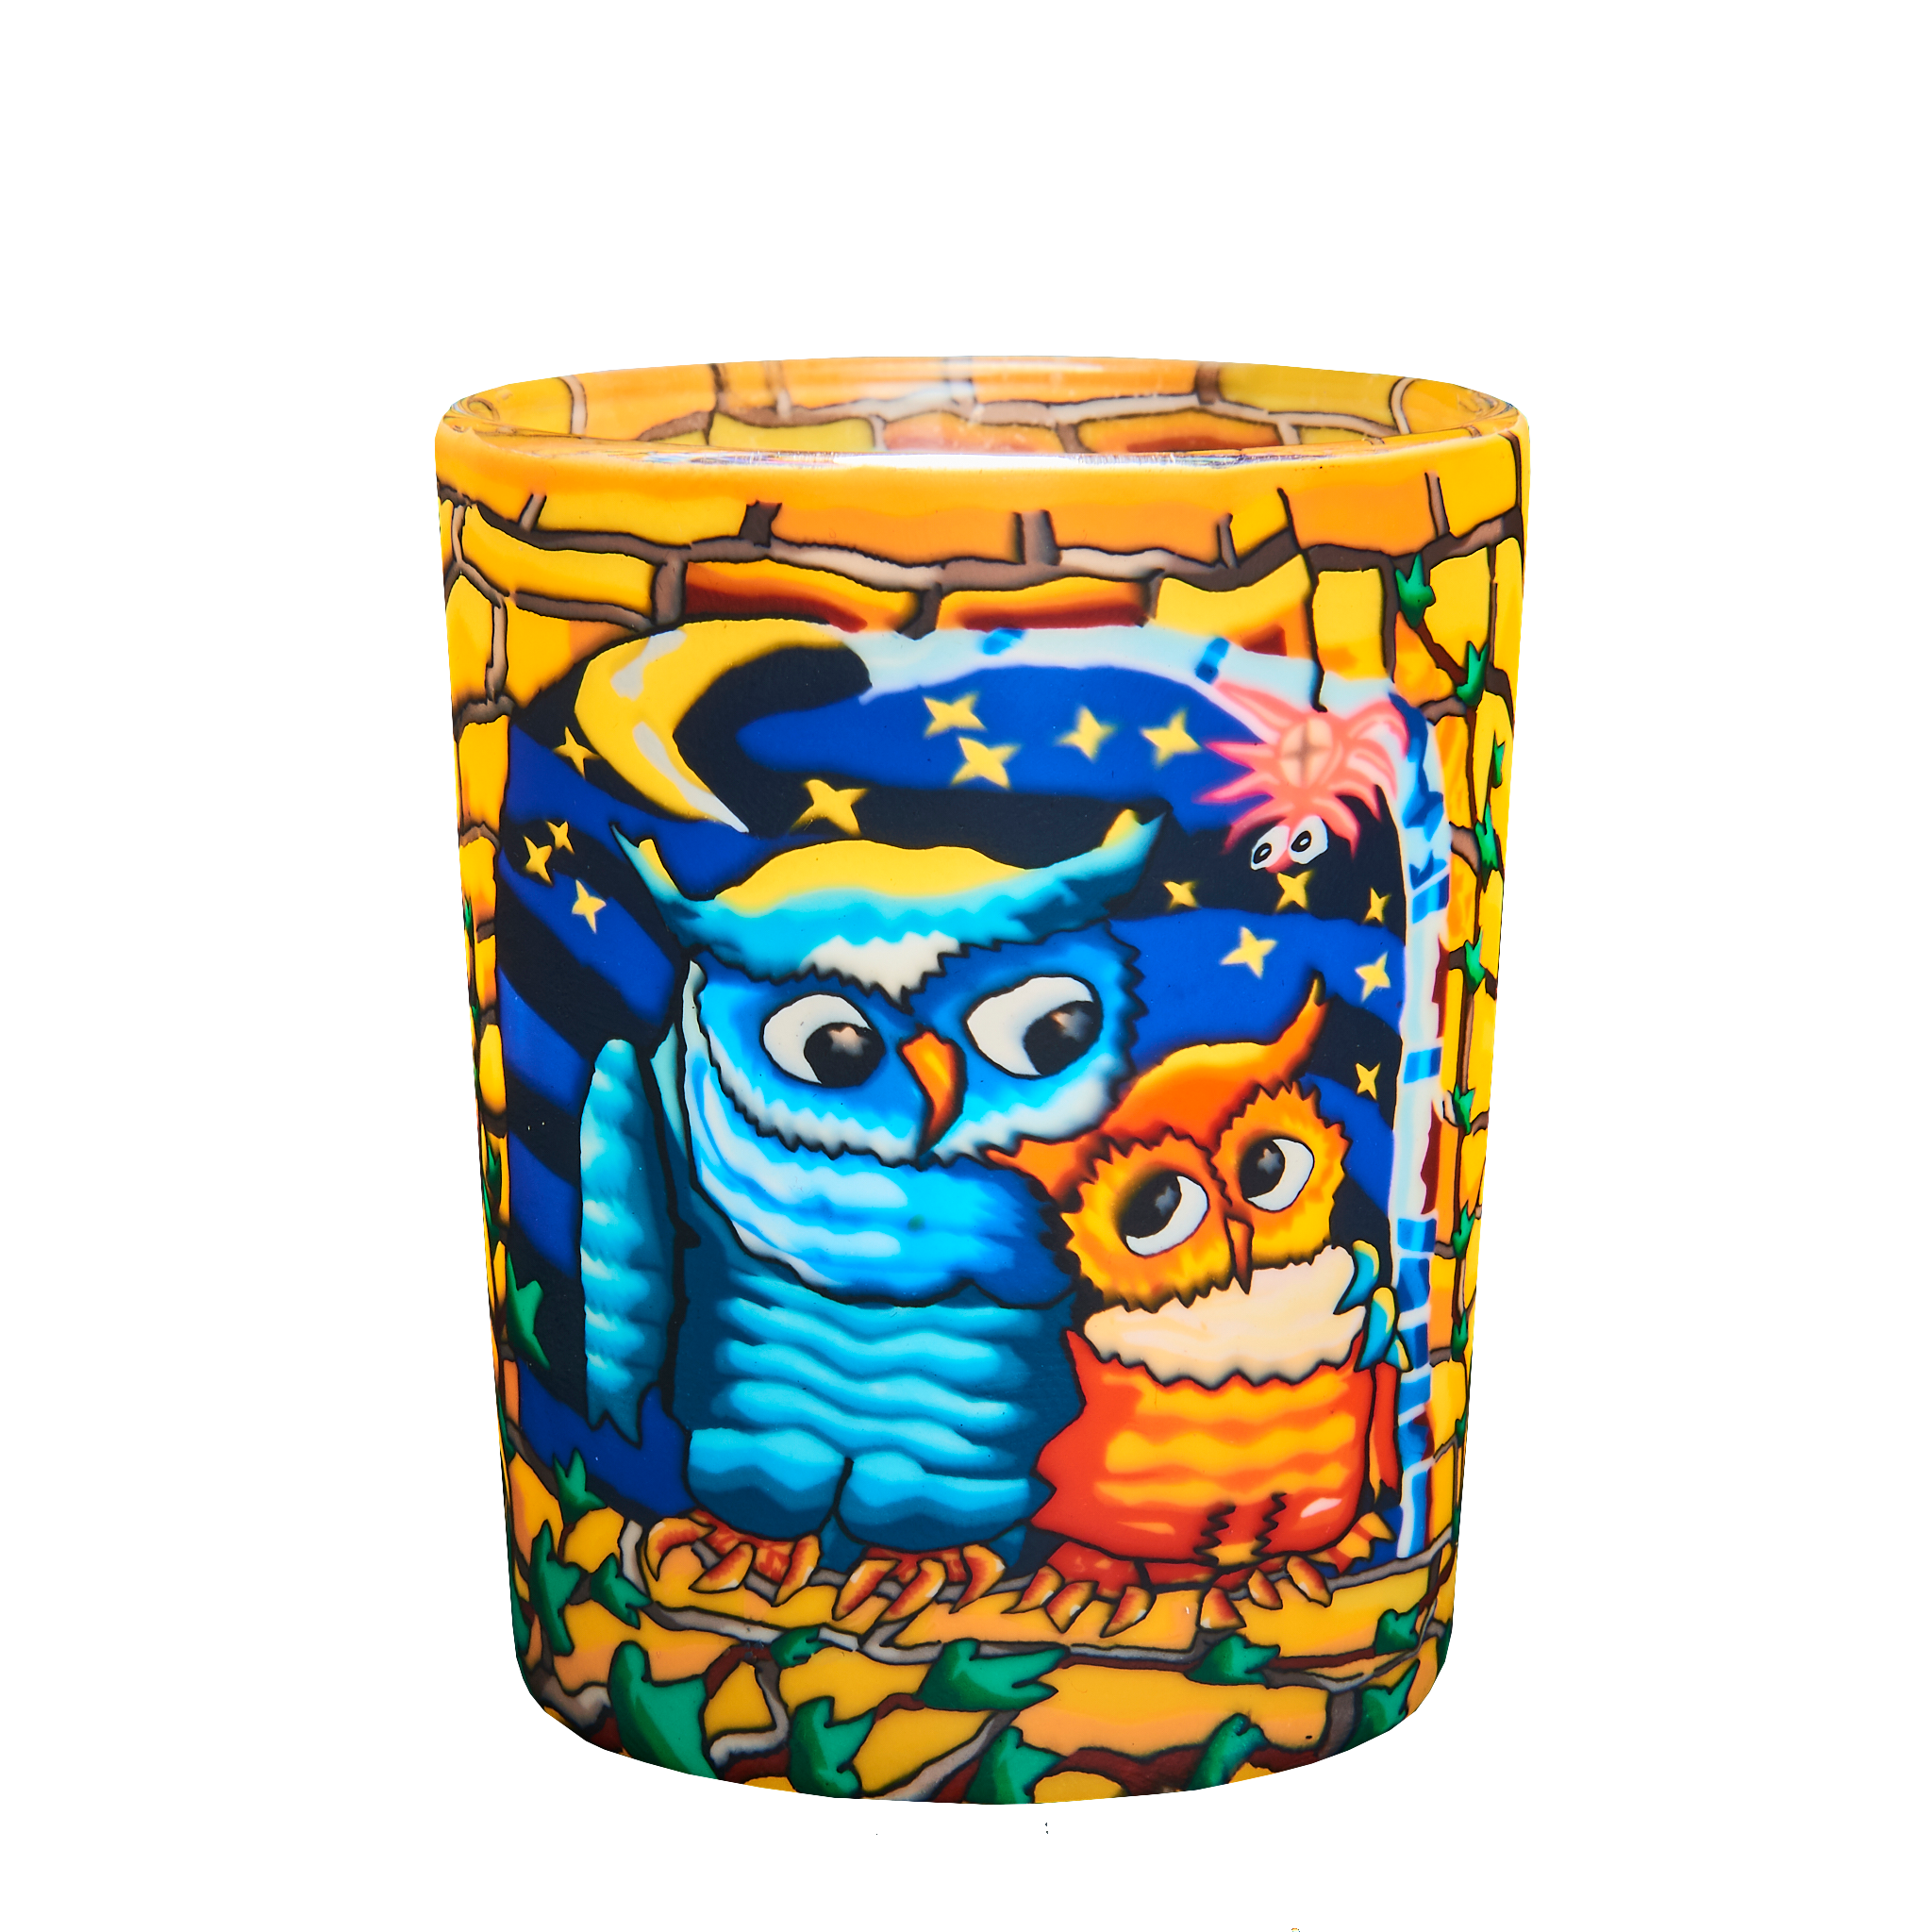 Owls by Night Votive Glowing Glass, Pack of 6